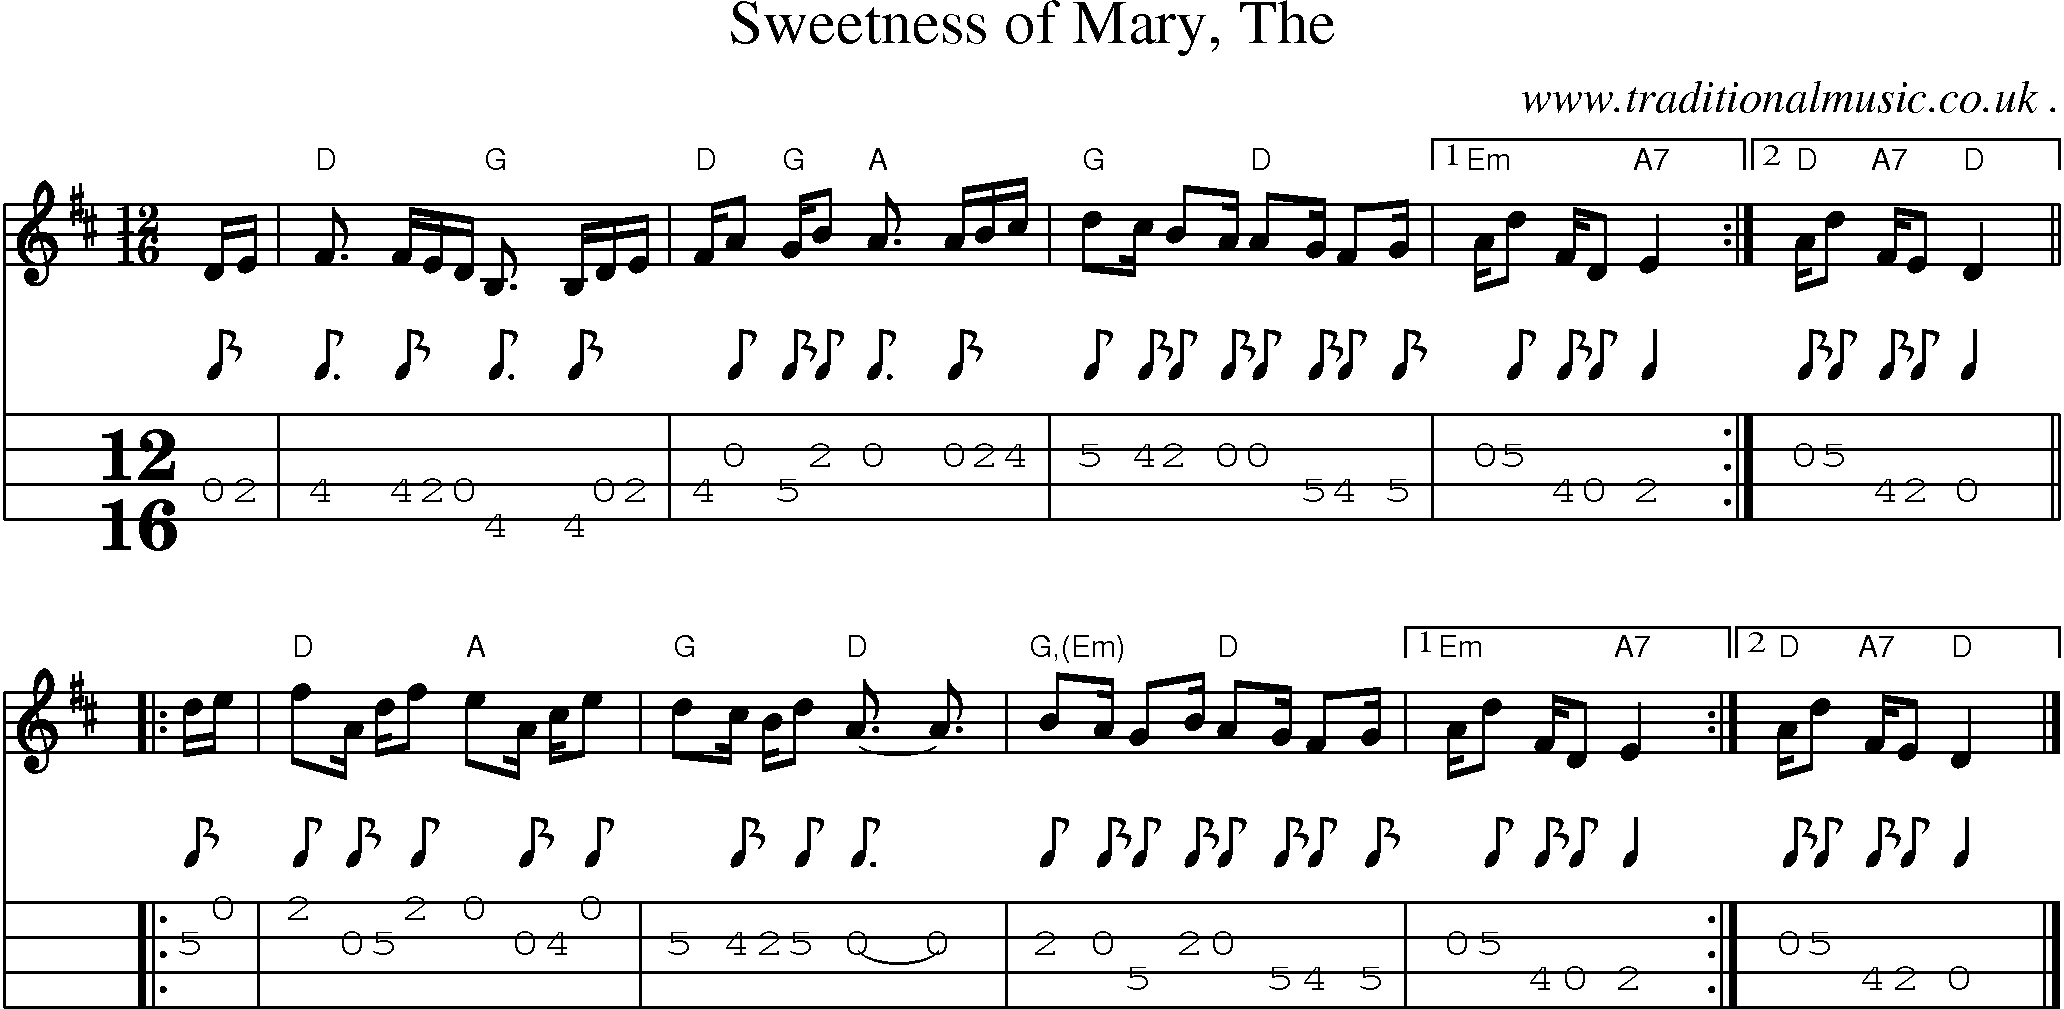 Sheet-music  score, Chords and Mandolin Tabs for Sweetness Of Mary The